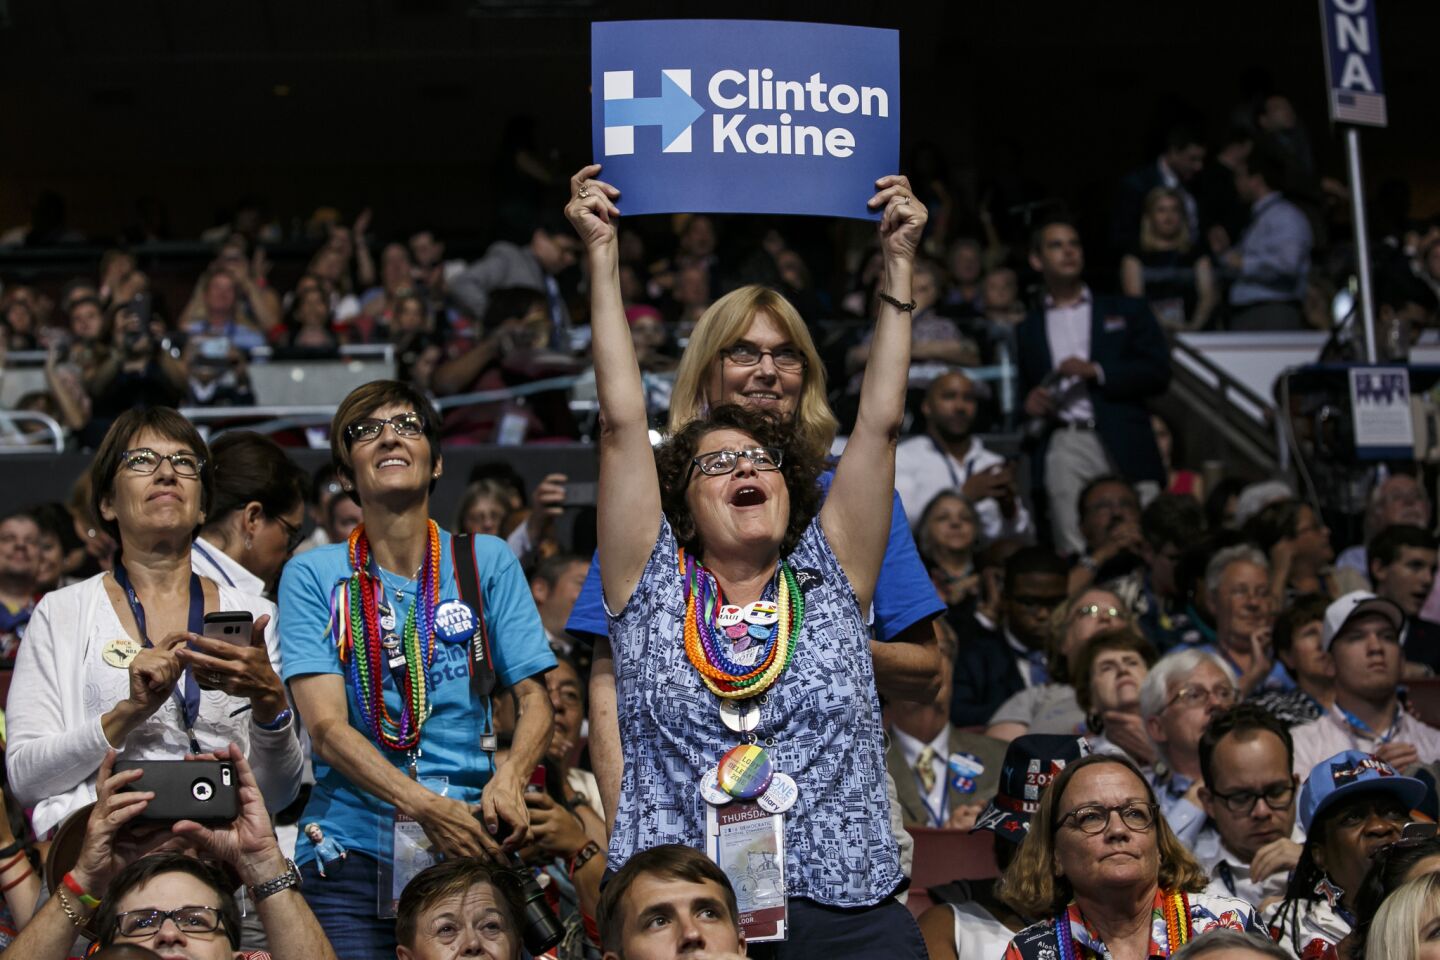 Delegates cheer for Hillary Clinton during the 2016 Democratic National Convention in Philadelphia.